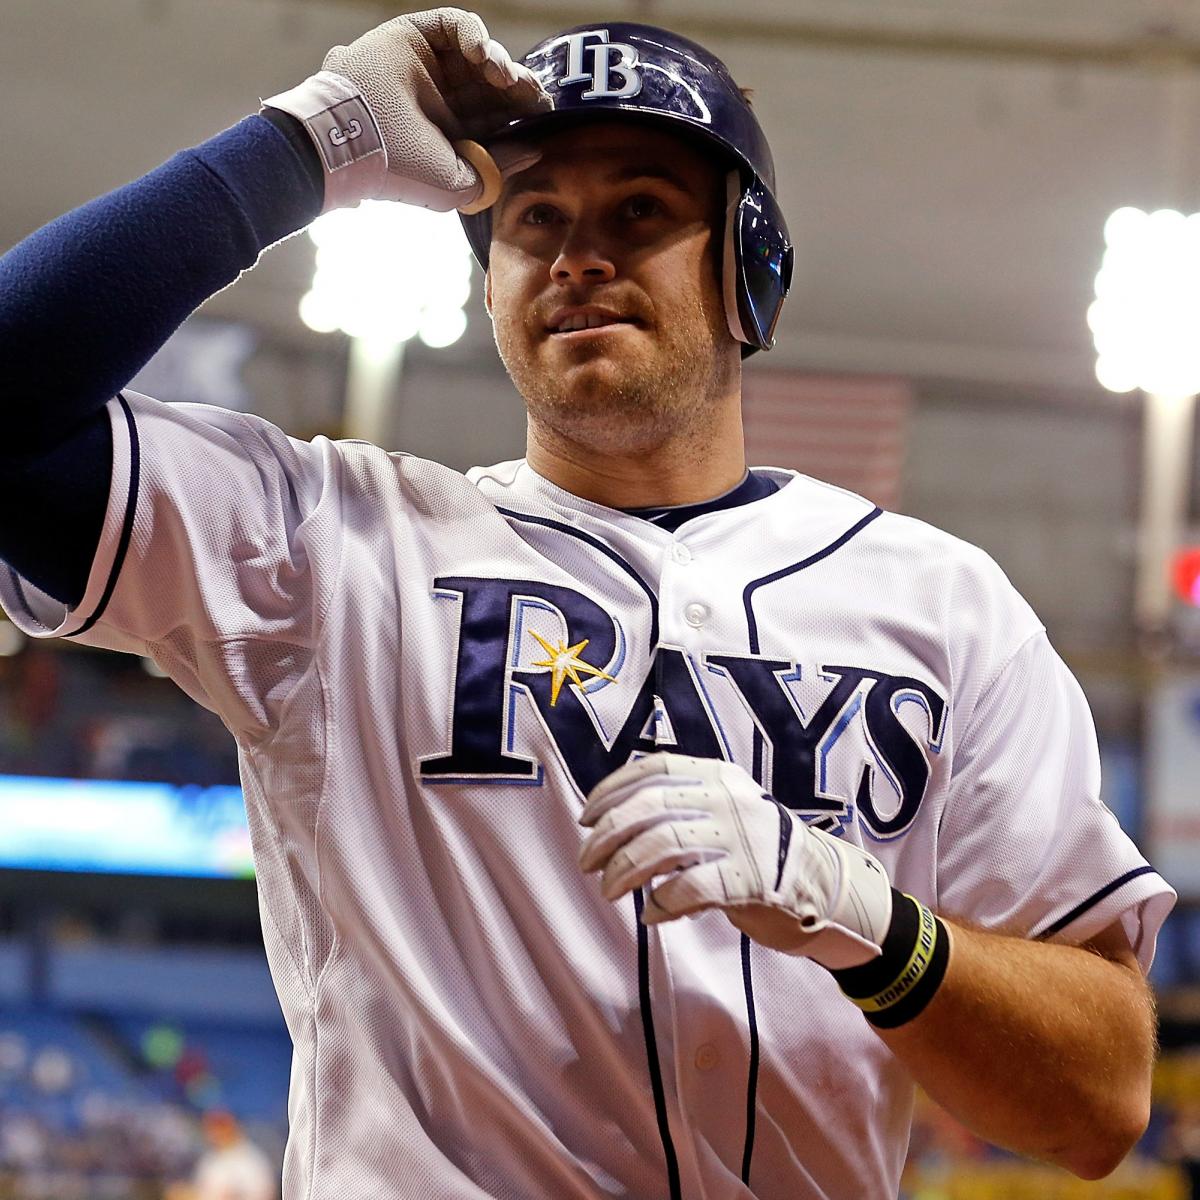 Rays Tales: Evan Longoria deserves All-Star nod, could get squeezed out